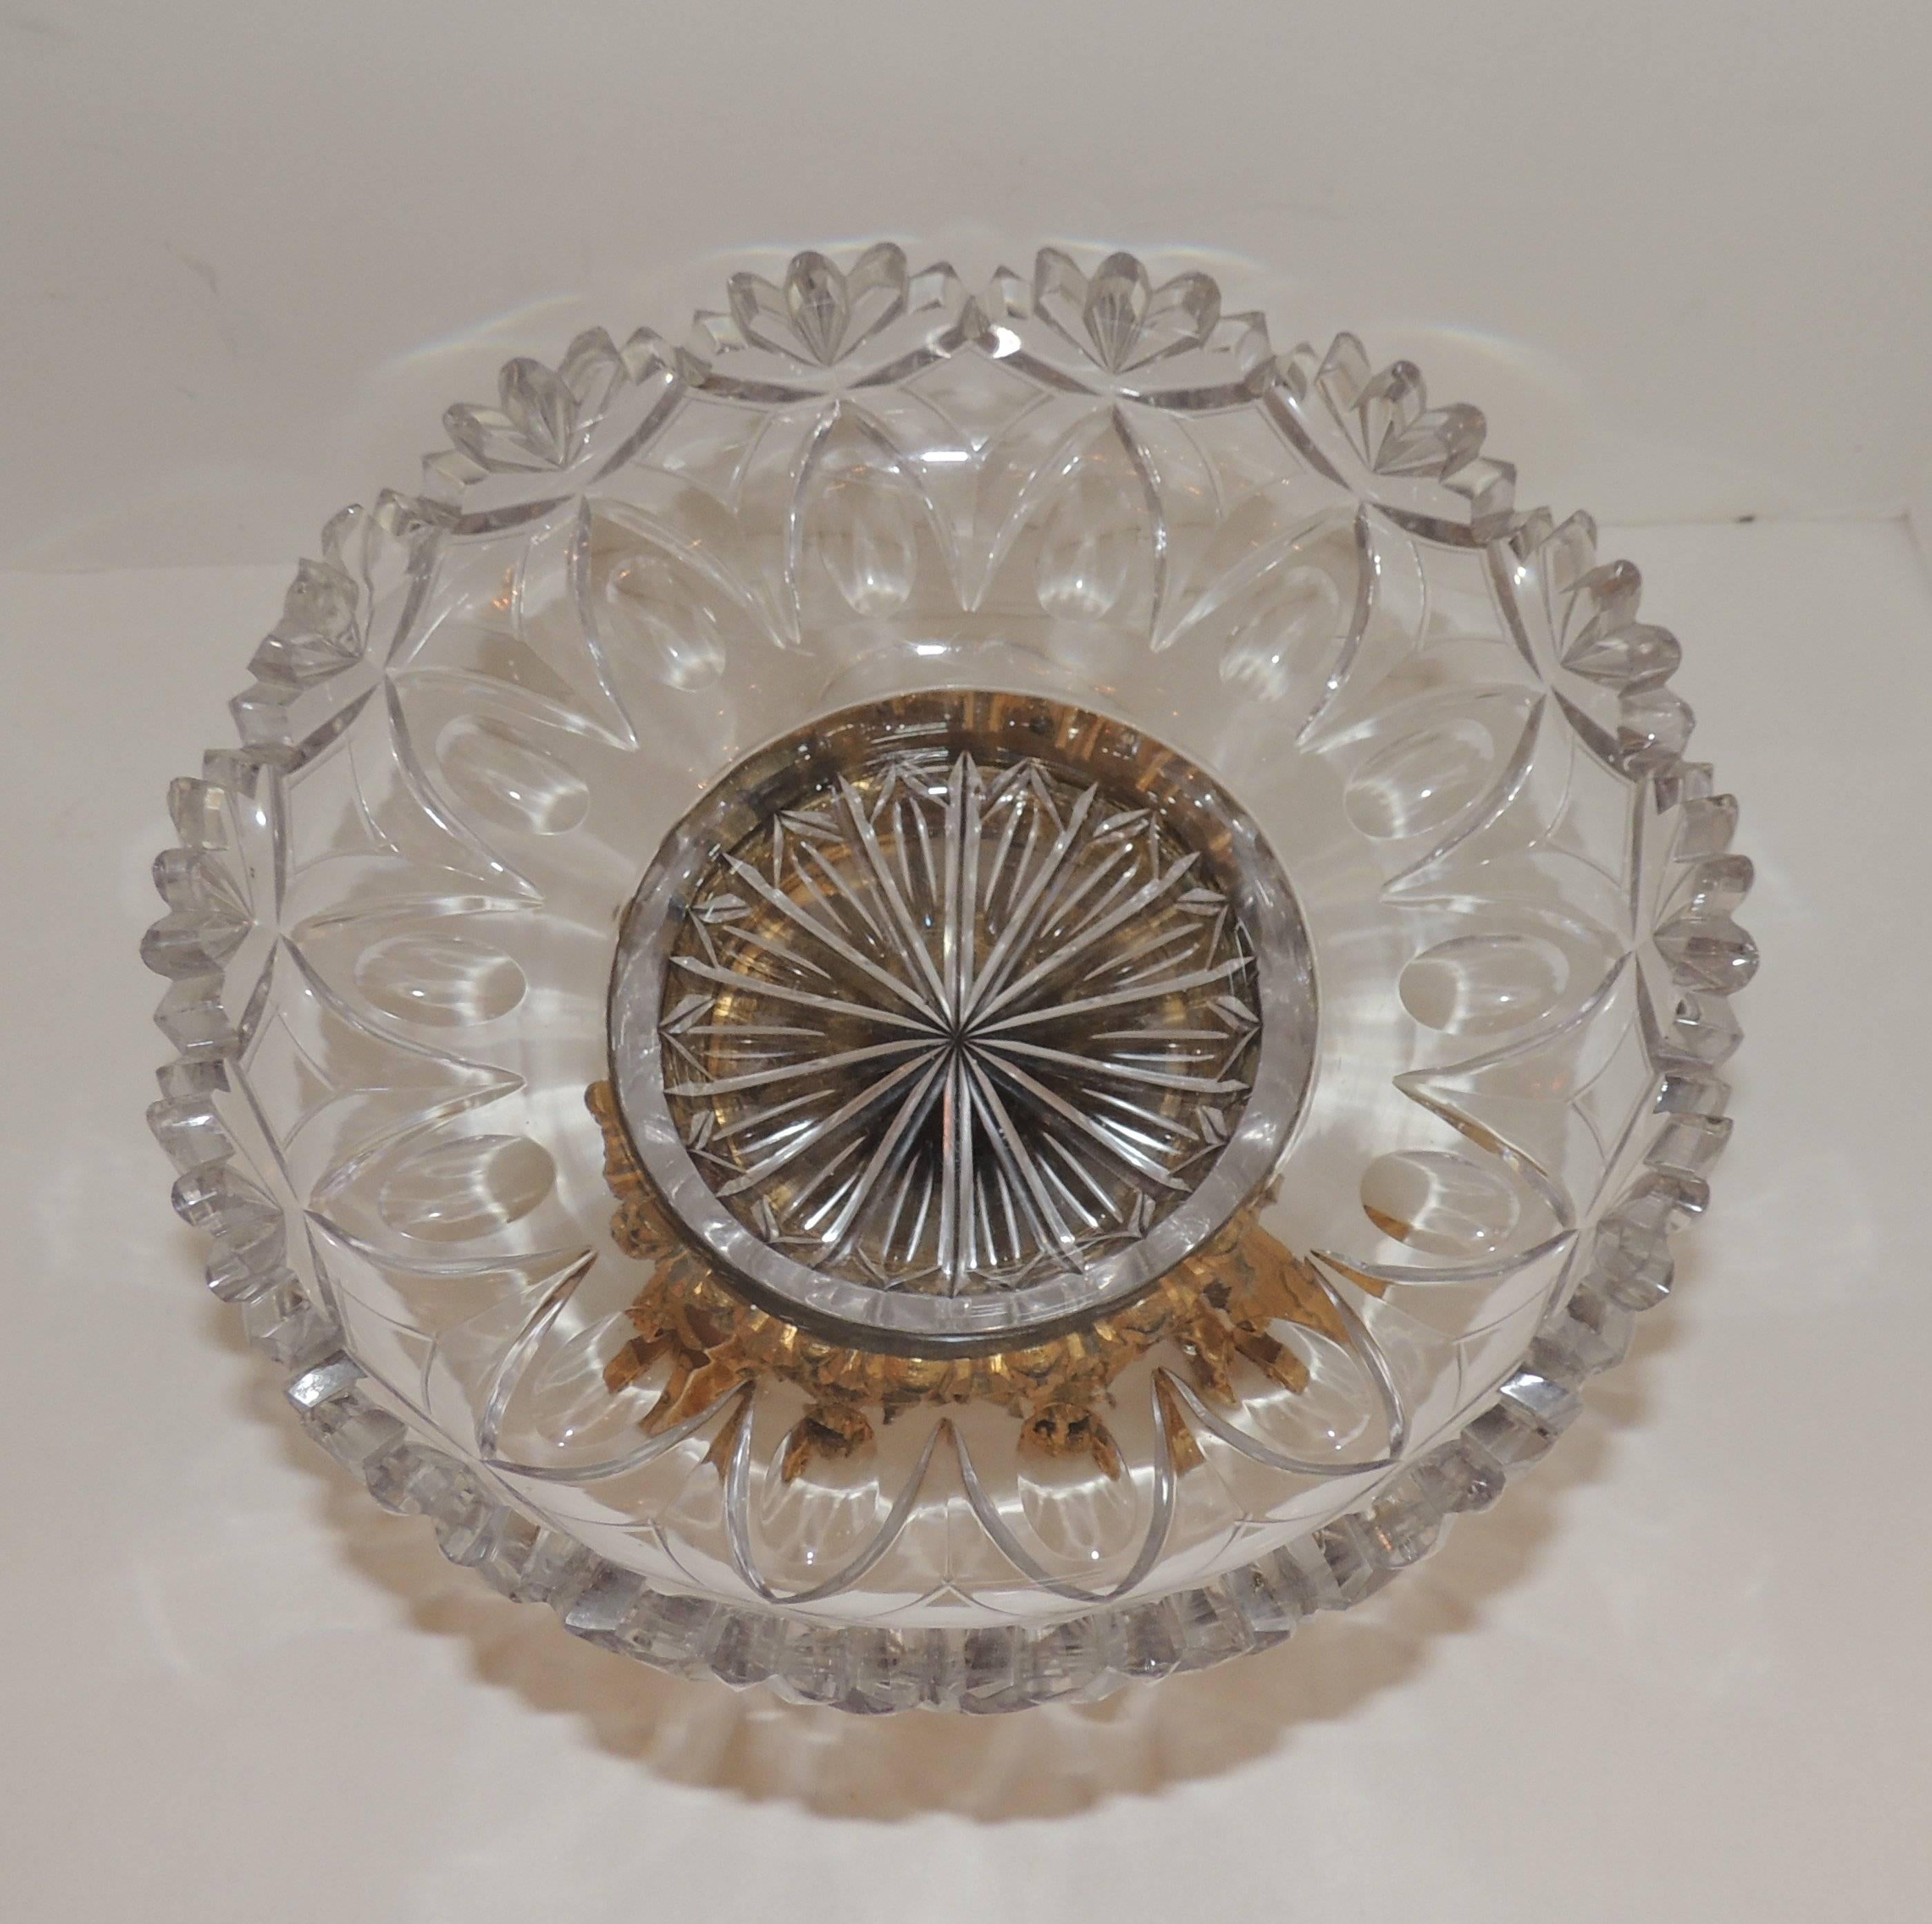 Belle Époque Wonderful French Dore Bronze & Cut Crystal Round Centerpiece Gilt Bows and Swags